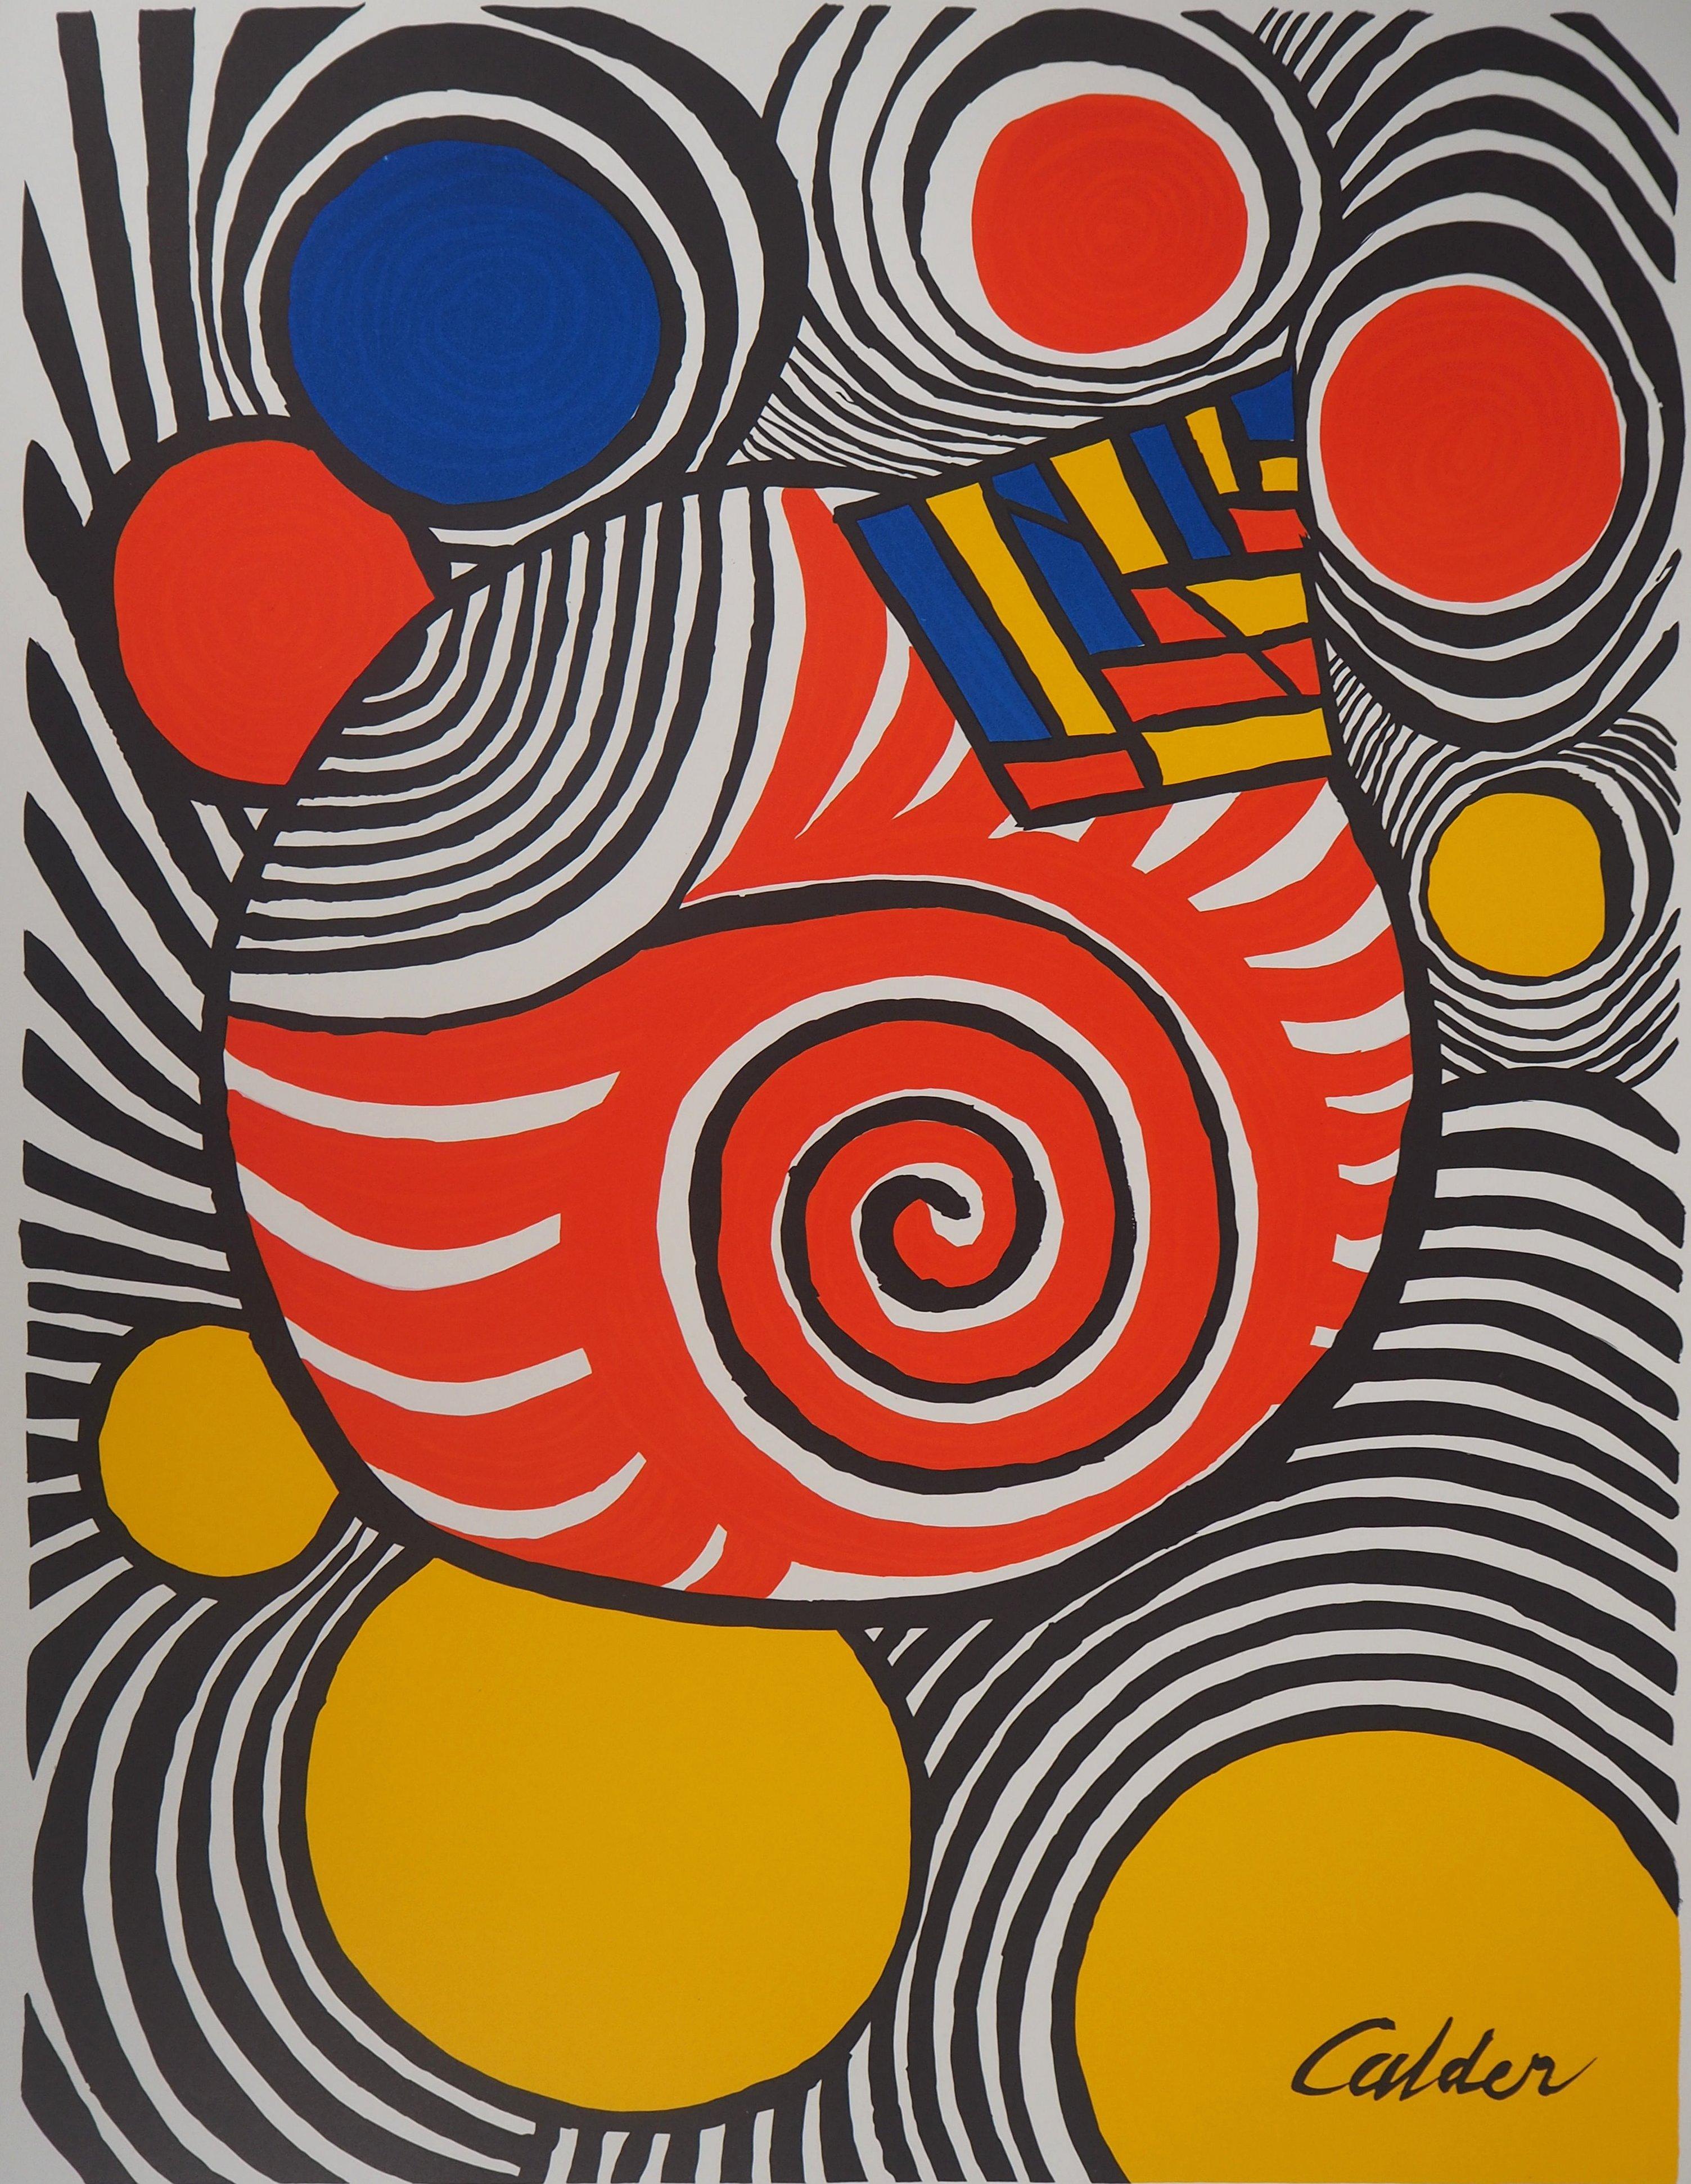 Color Balloons and Waves (Les Travestis du Reel) - Lithograph poster - 1979 - Abstract Geometric Print by Alexander Calder